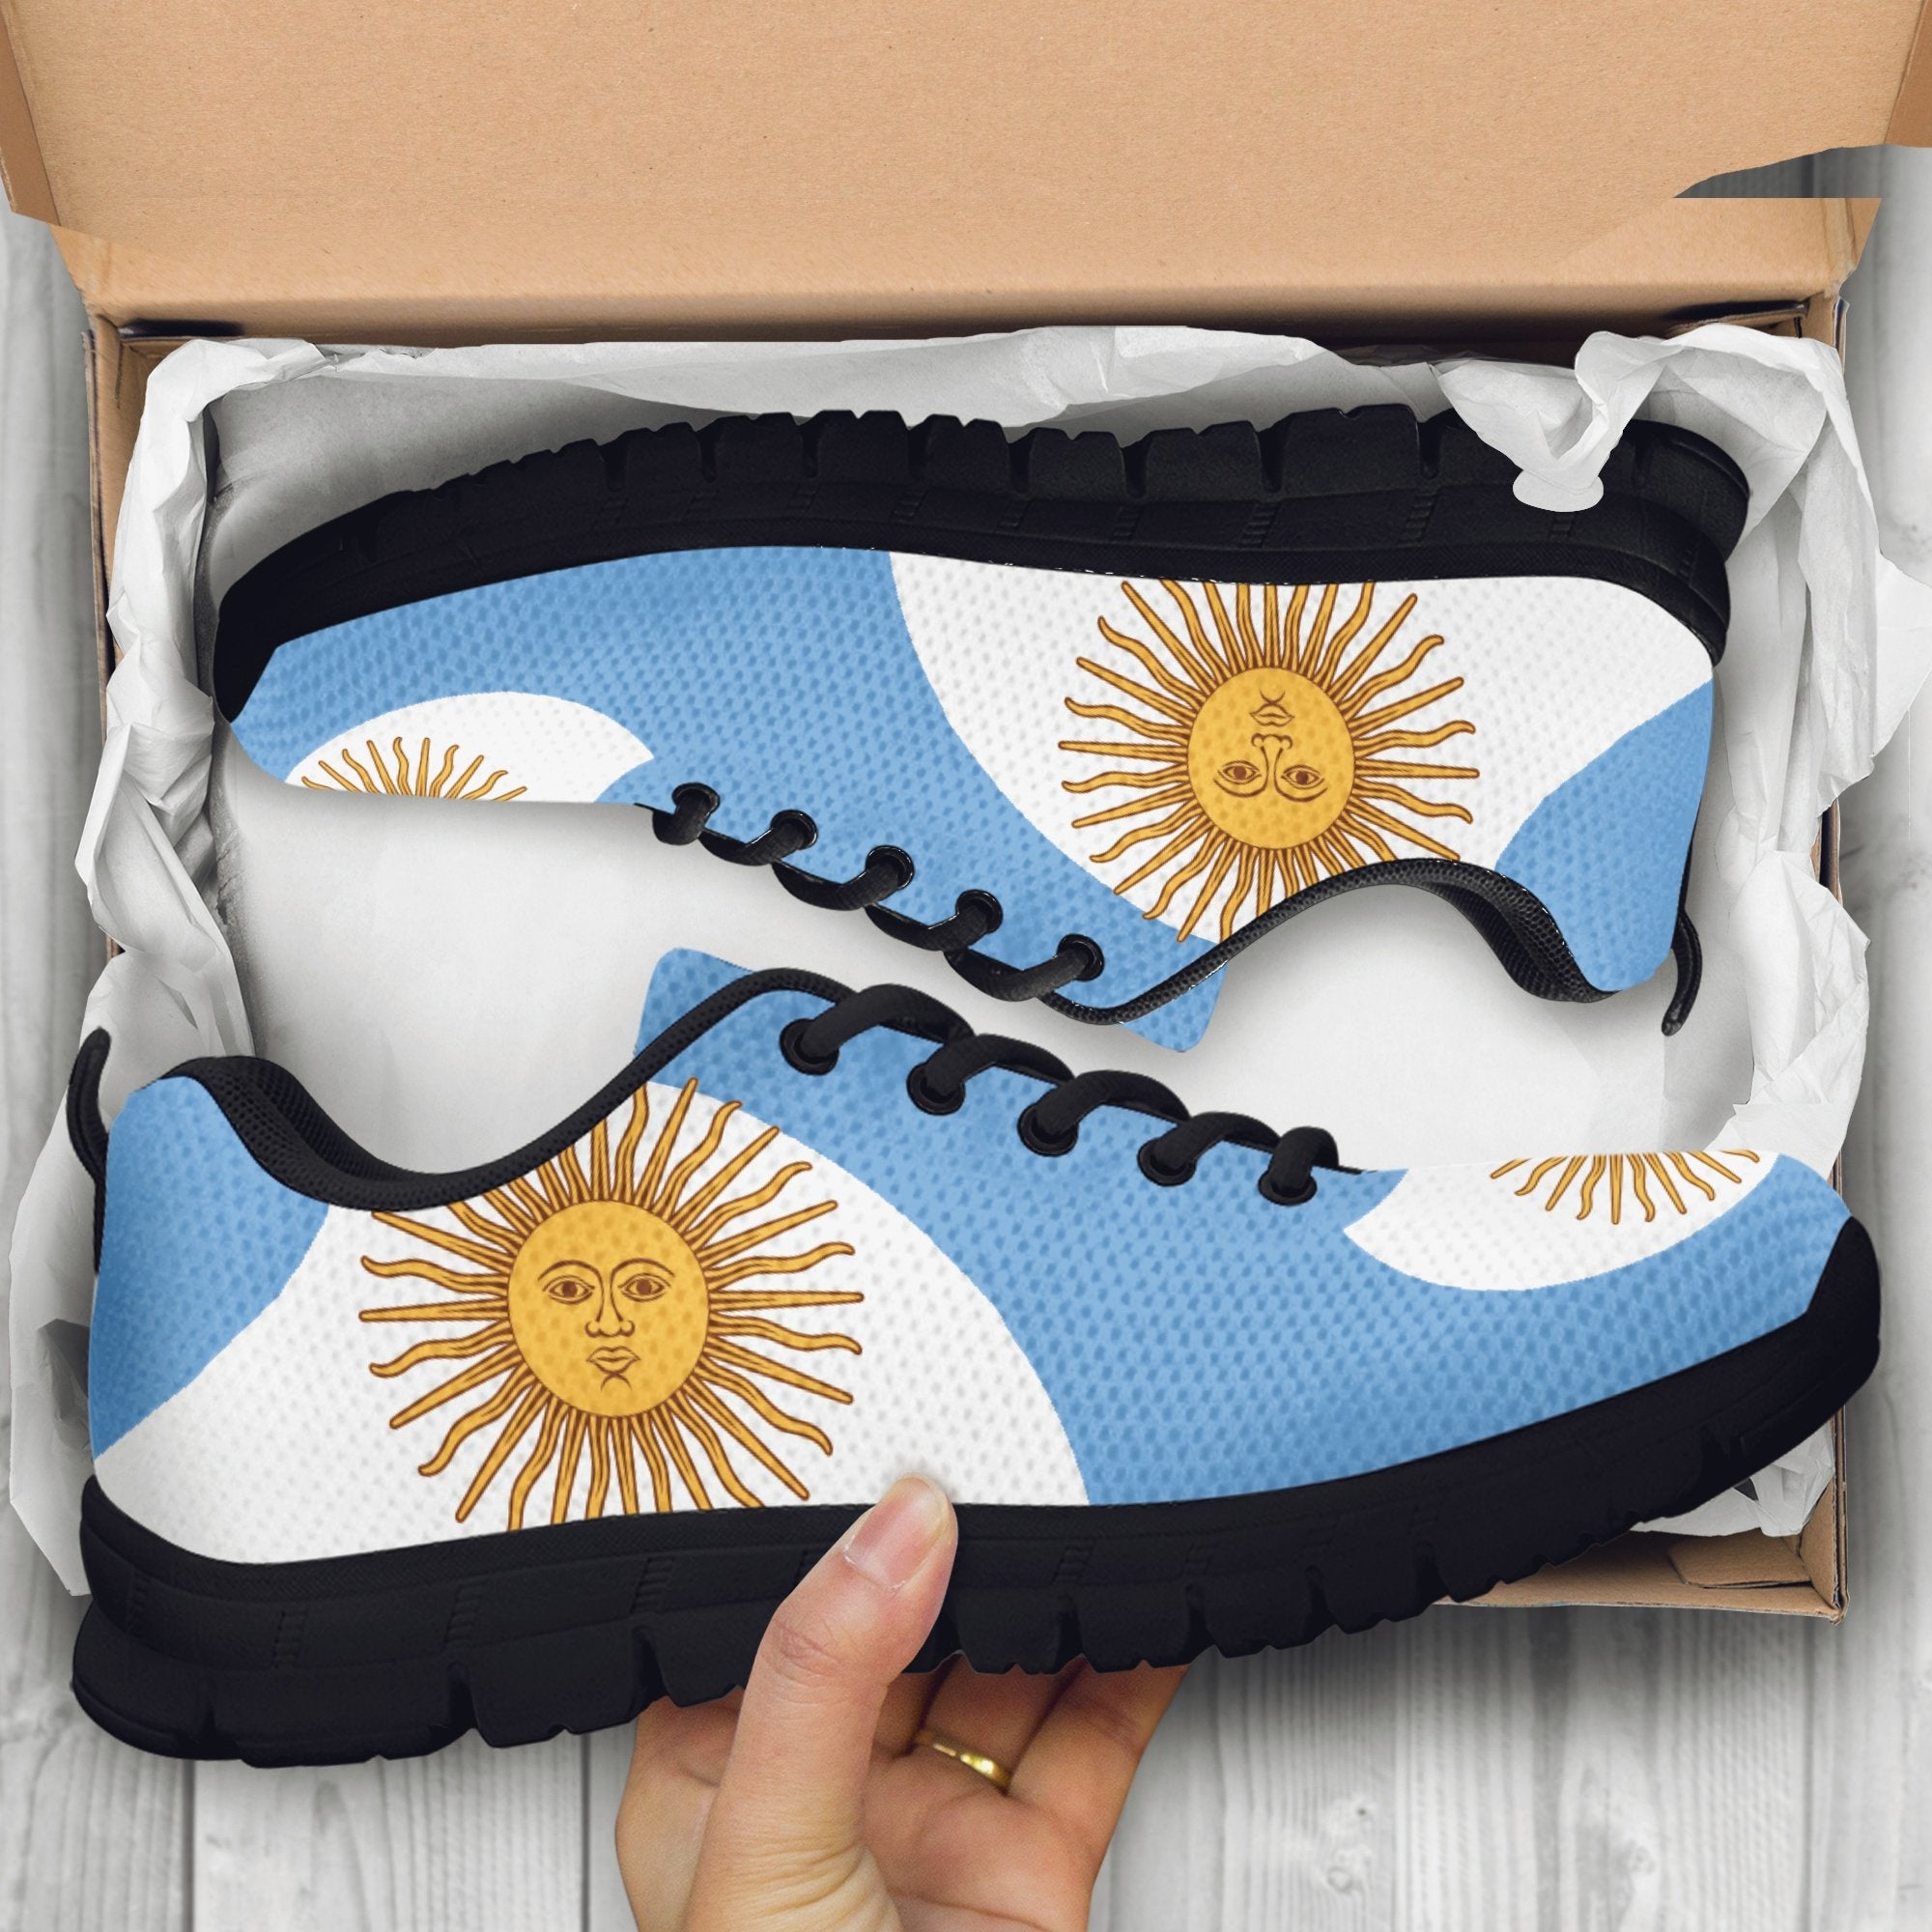 argentina-sneakers-cullinan-style